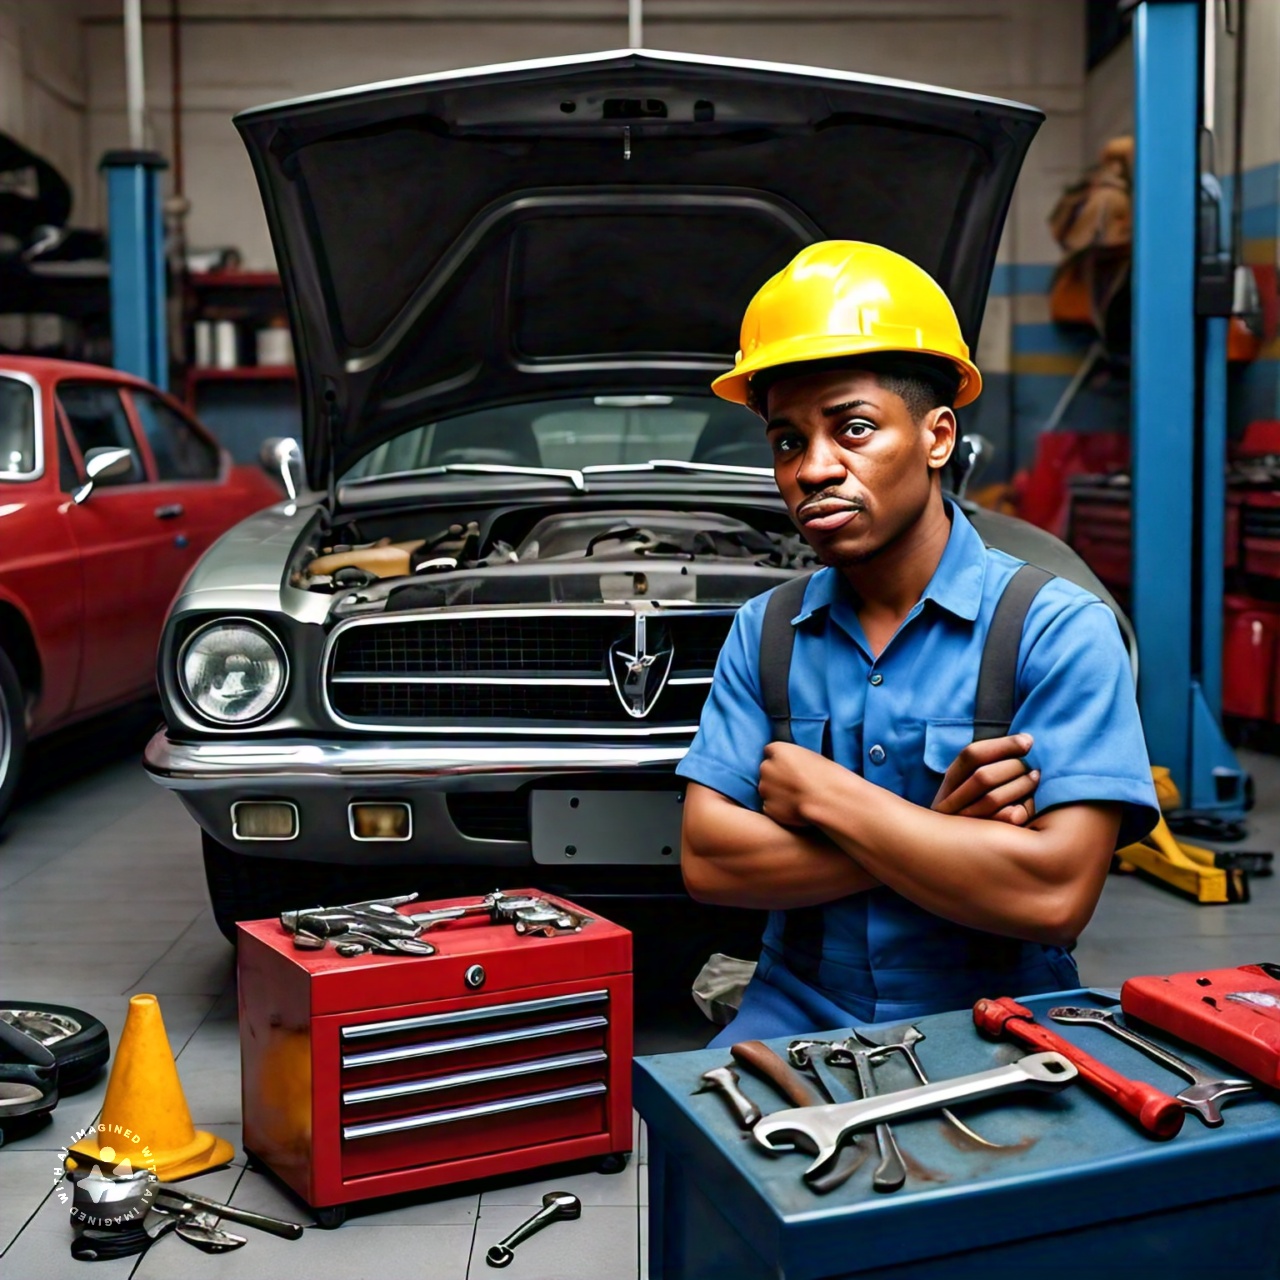 Why Should I Care About Car Maintenance?